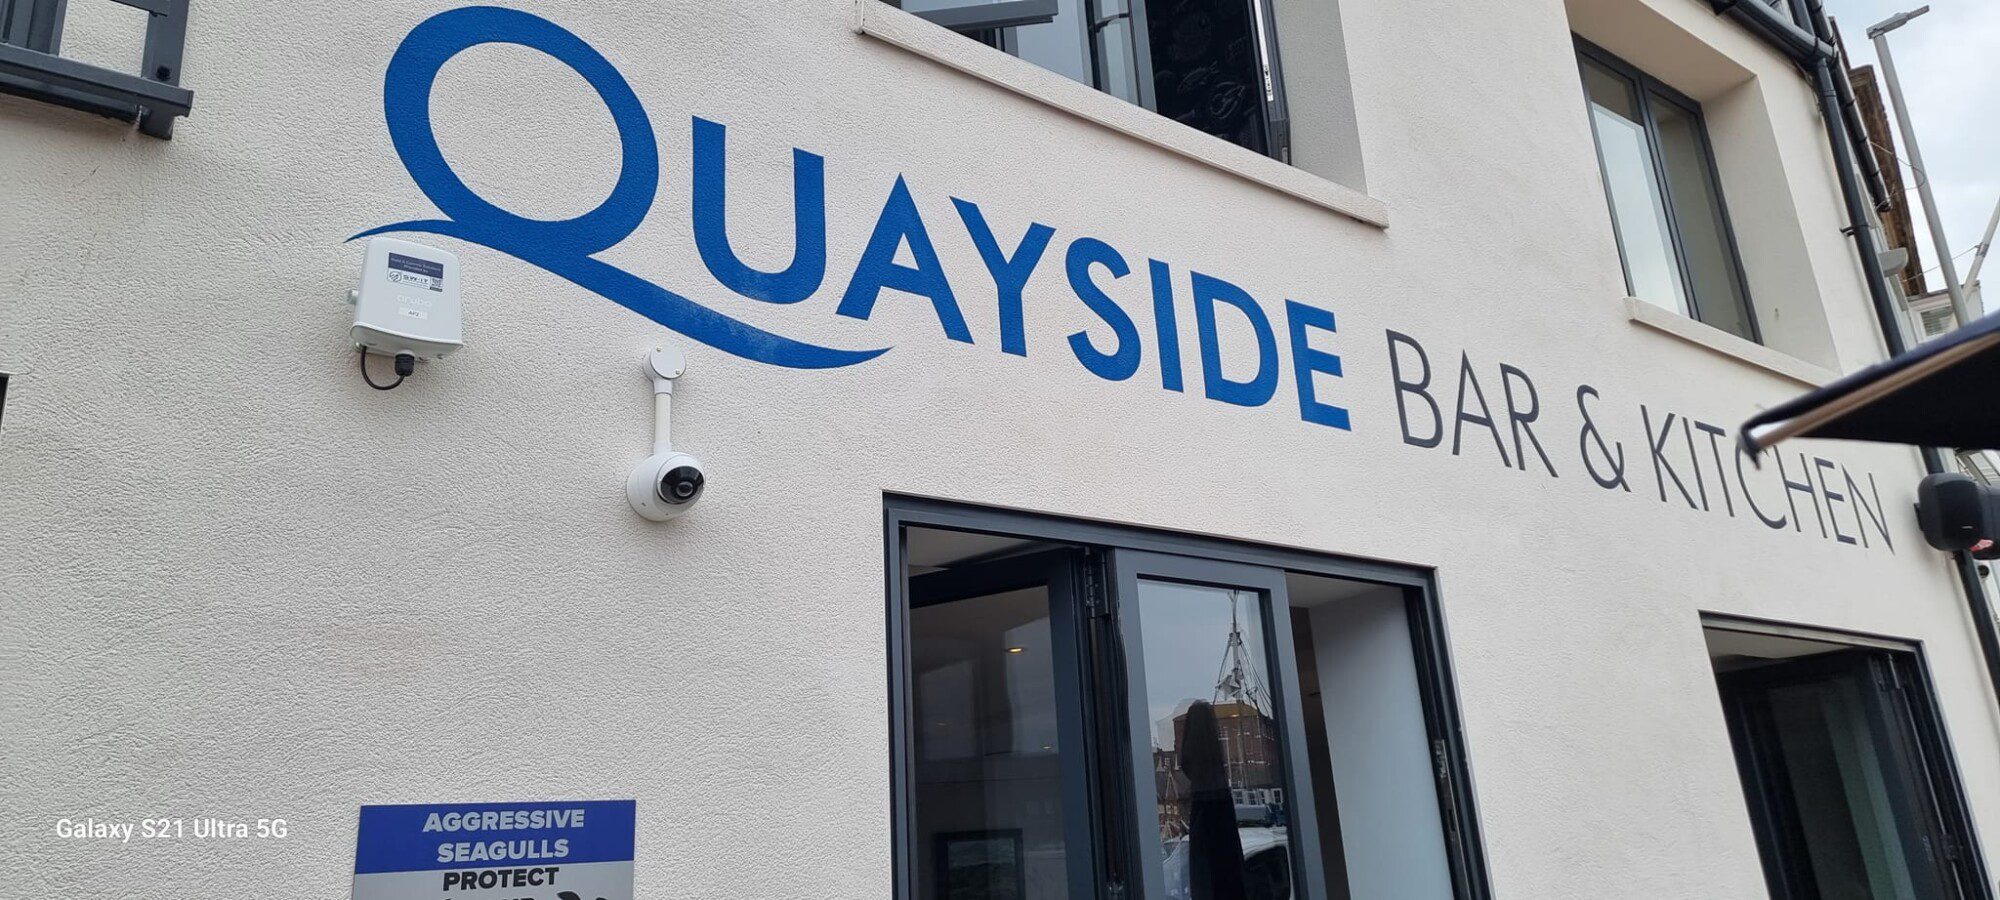 Quayside Bar and Kitchen CCTV Upgrade South West IT